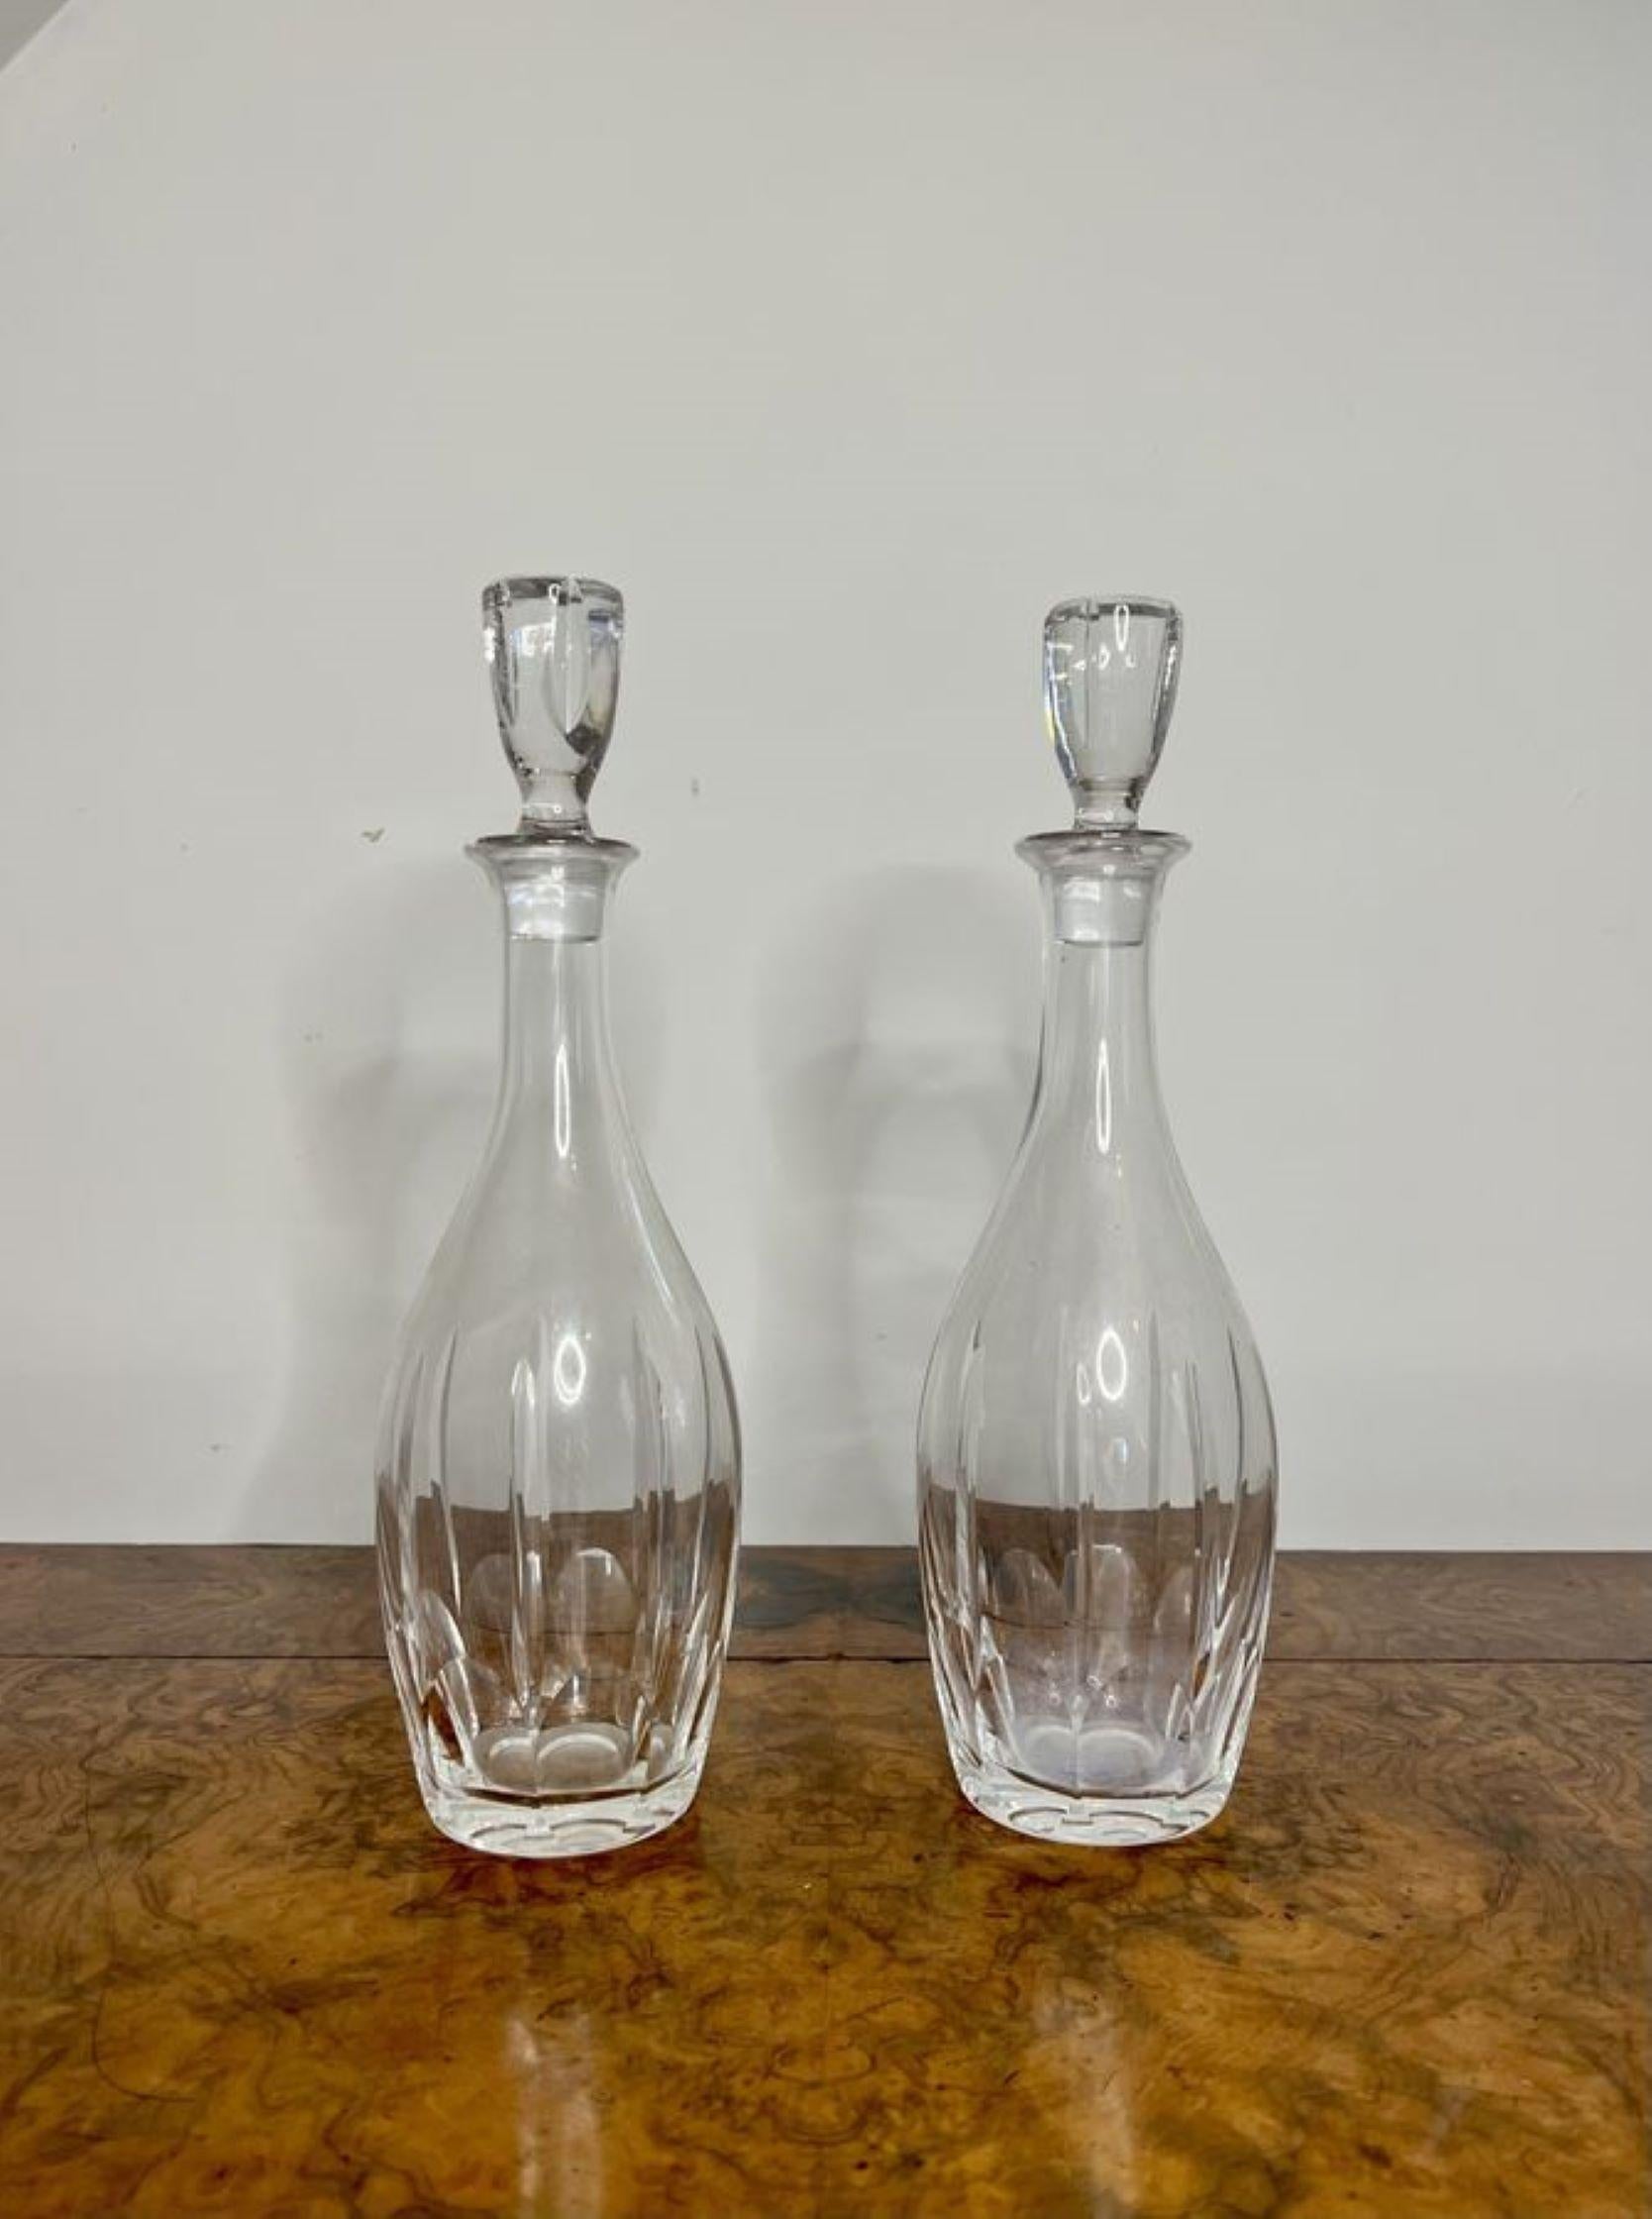 Fine pair of antique Edwardian glass decanters having a fine pair of decanters with the original glass stoppers.

D. 1910